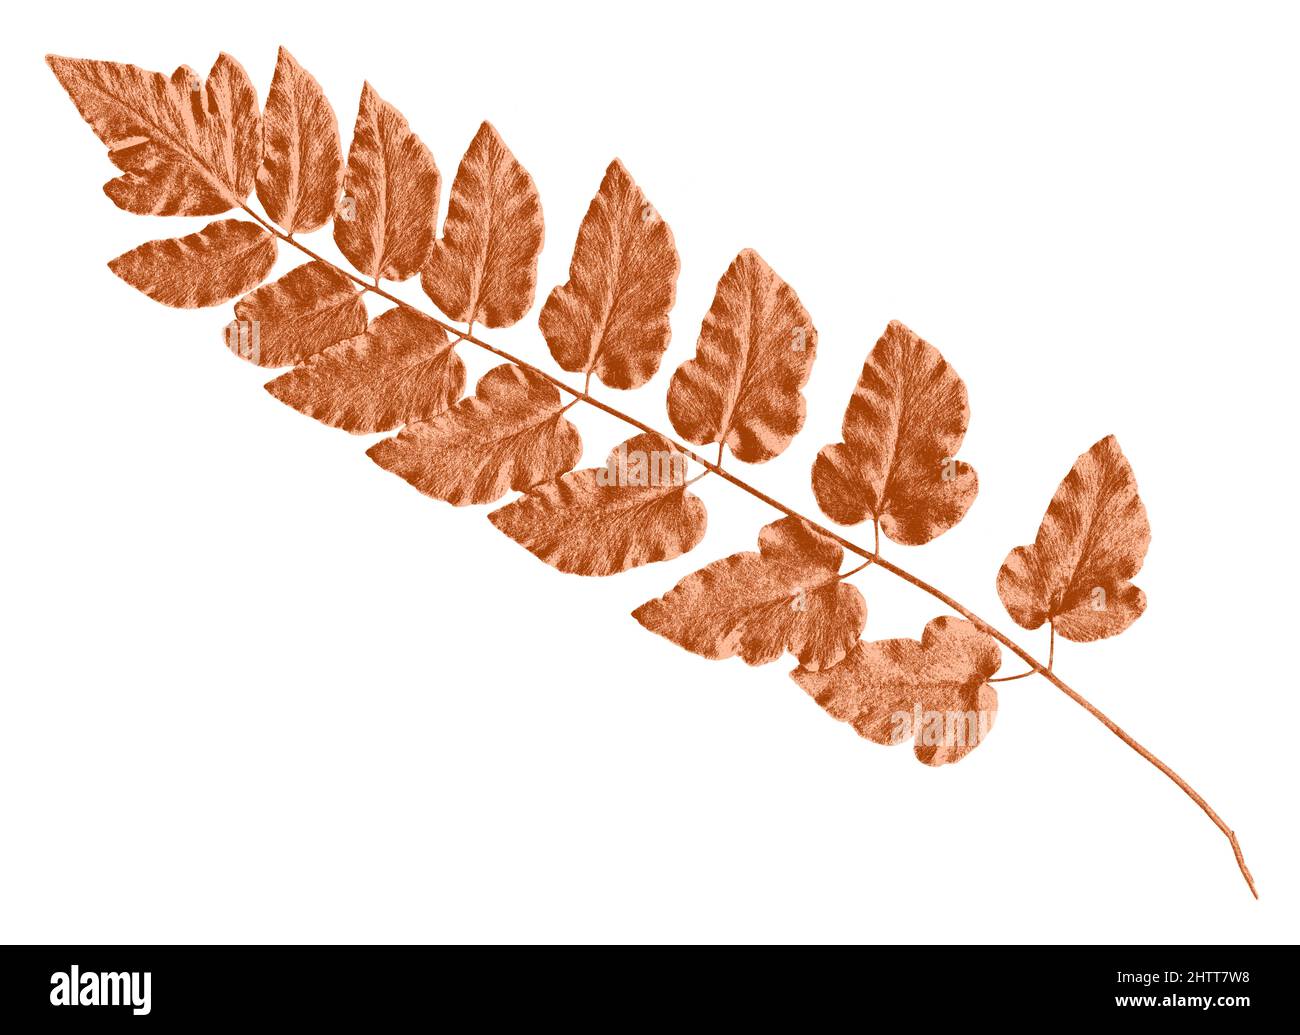 Fern leaf illustration in brown tones on white background Stock Photo